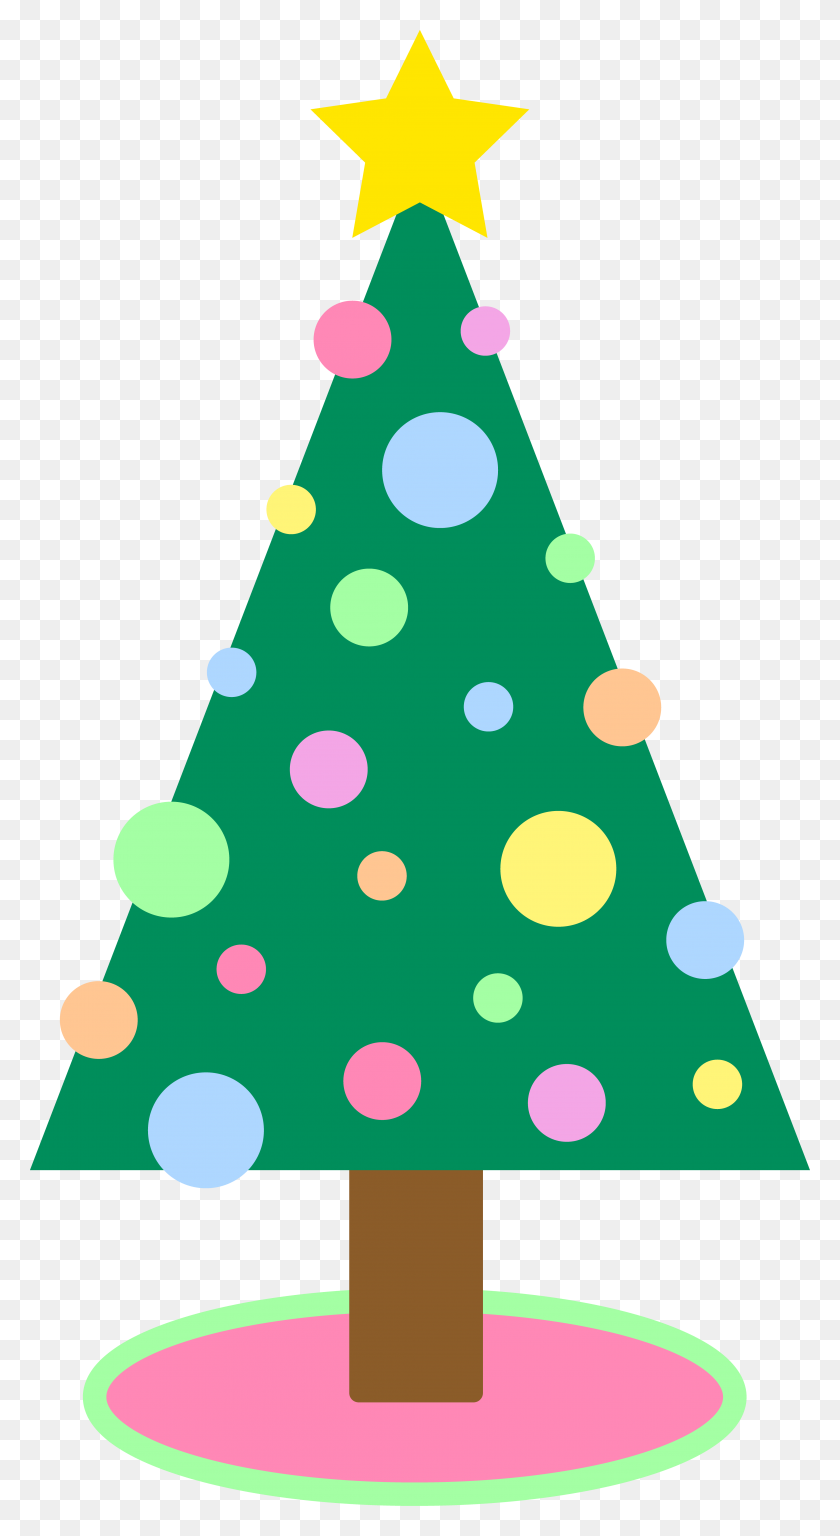 4150x7856 Christmas Tree Clipart No Ornaments With Star Collection - Hanging Stars Clipart